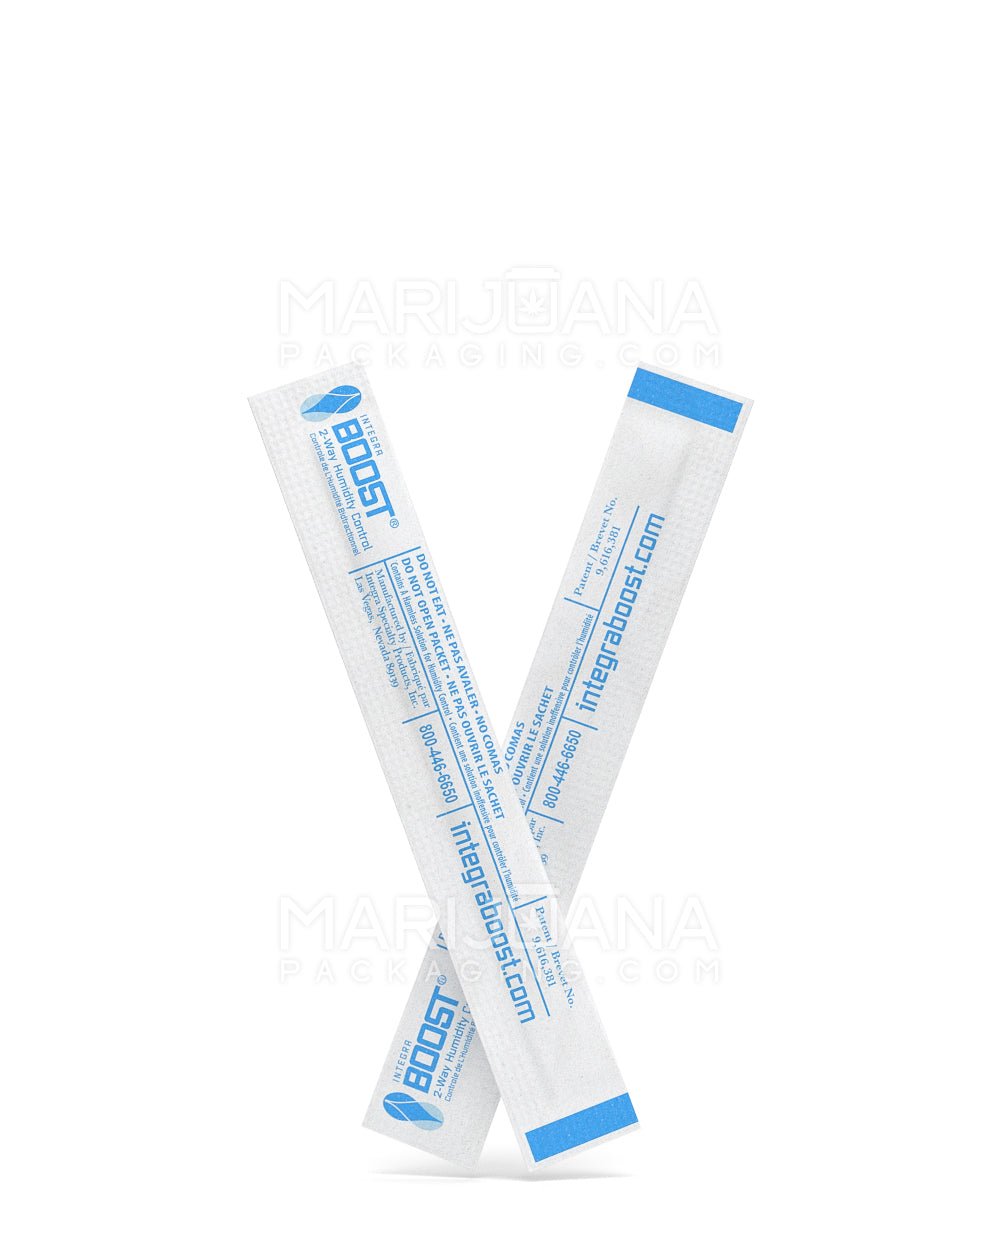 INTEGRA | Boost Pre-Roll Humidity Packs | 80mm - 55% - 100 Count - 3